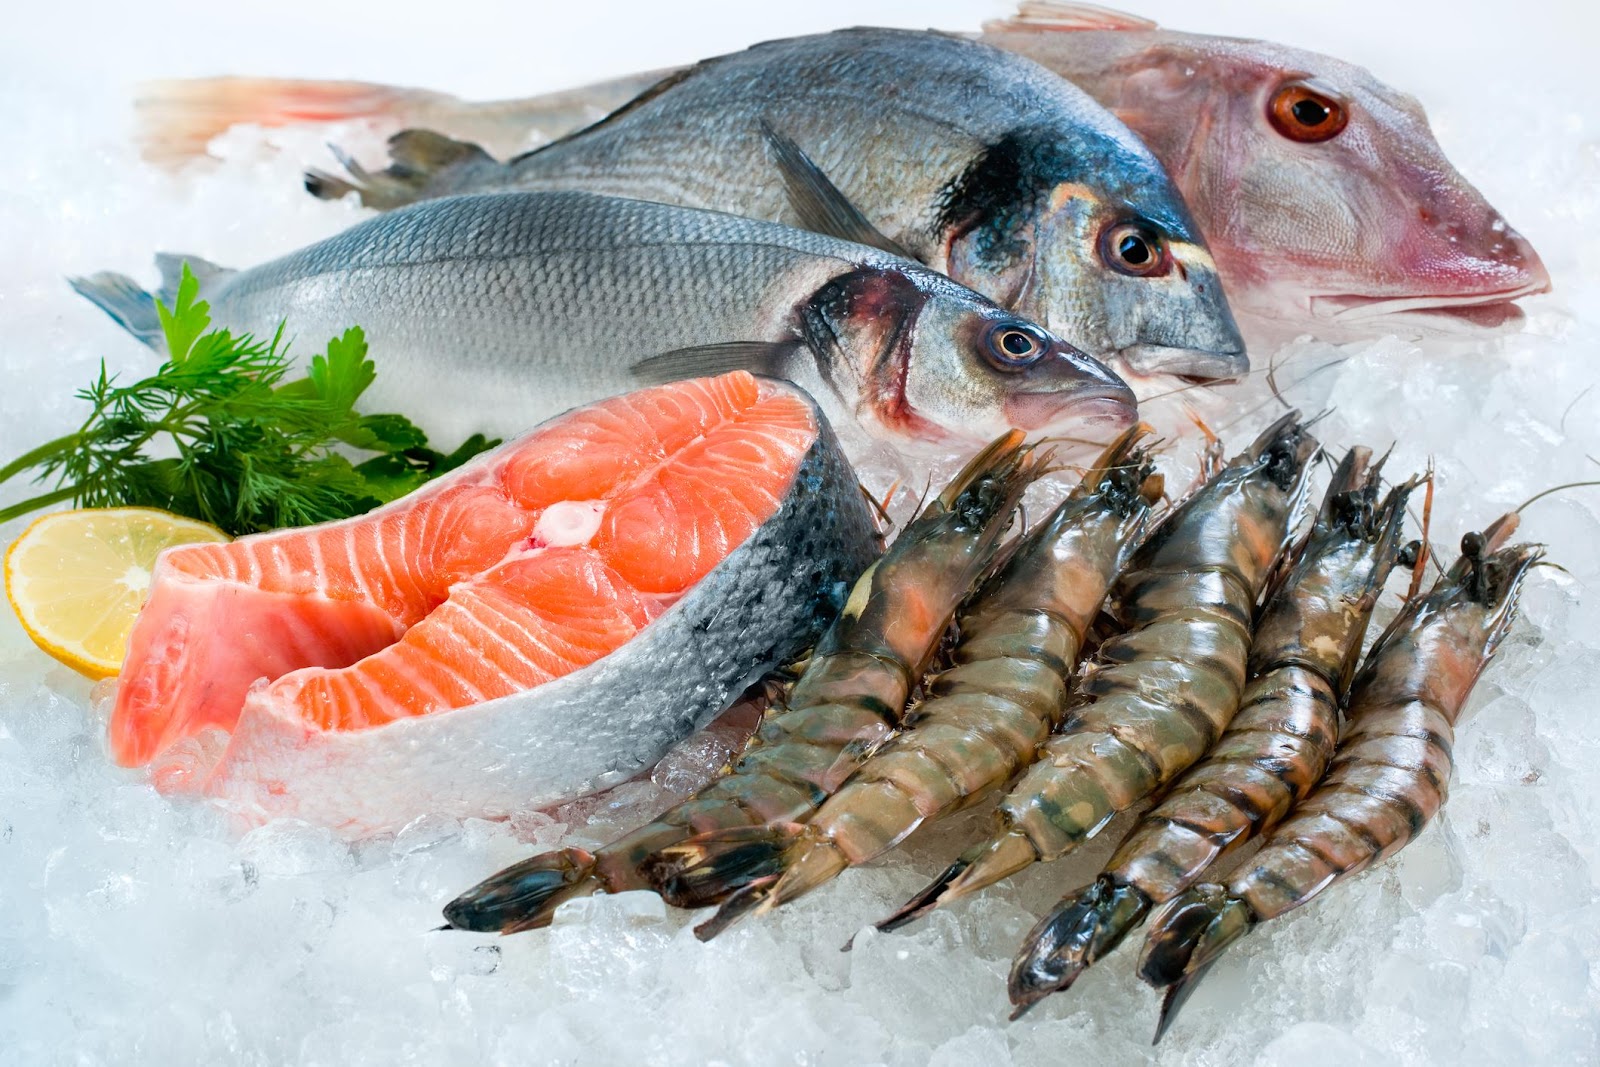 A group of fish and shrimp on ice

Description automatically generated